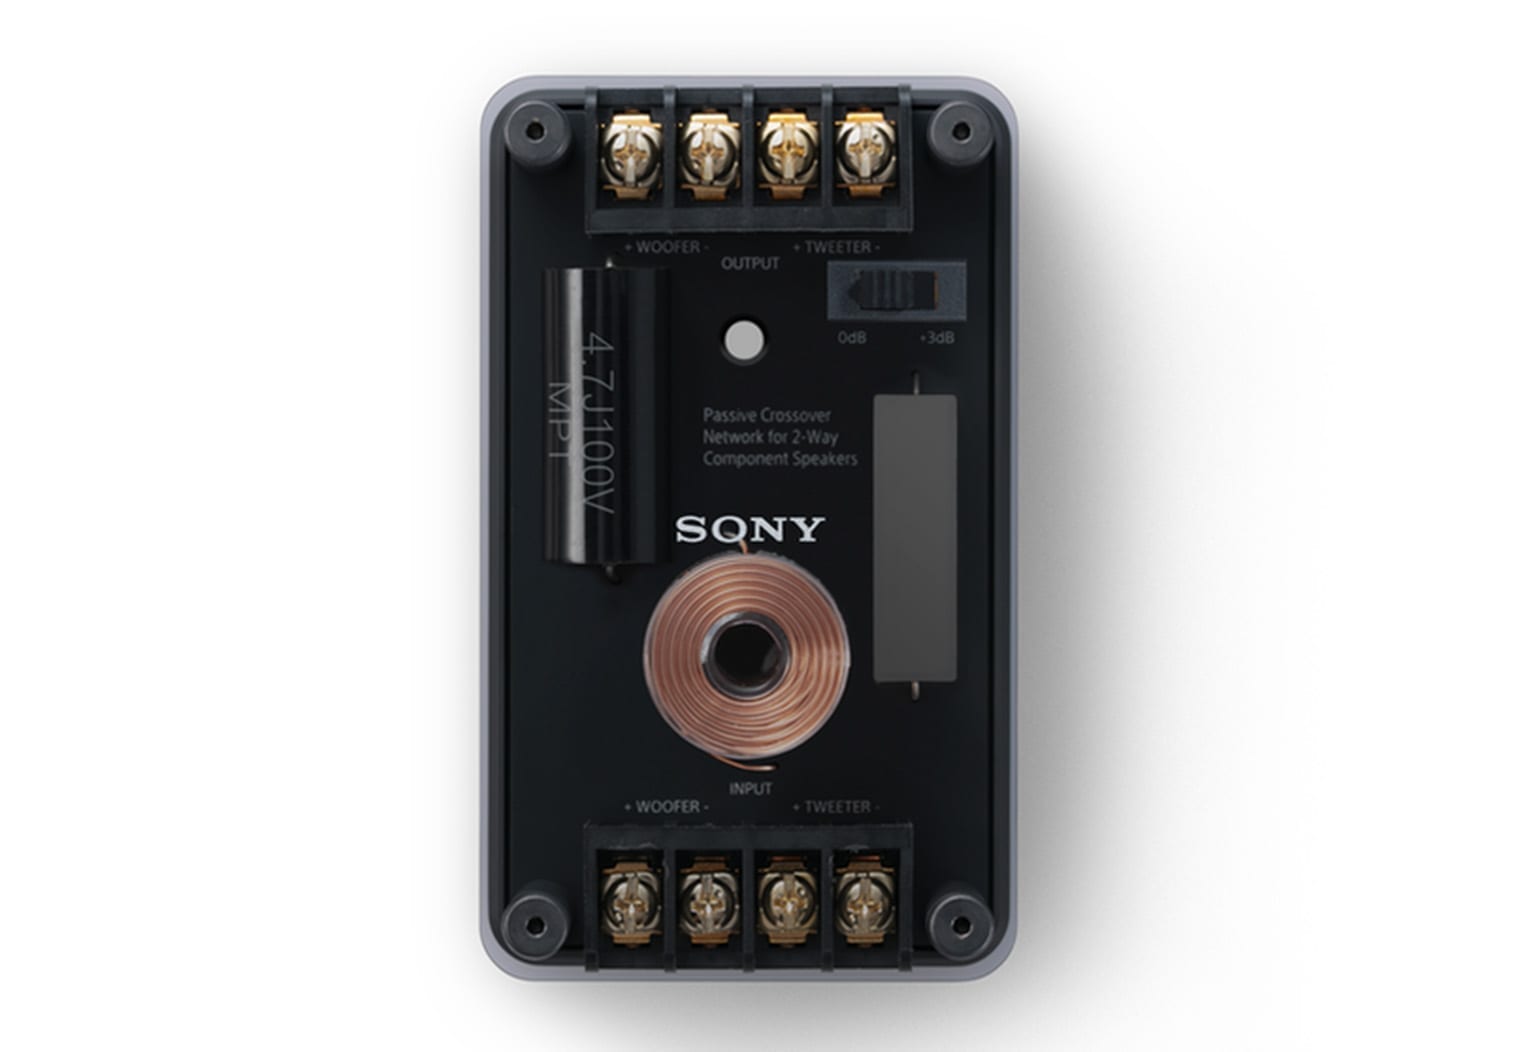 Sony XS-162ES crossover image from sony